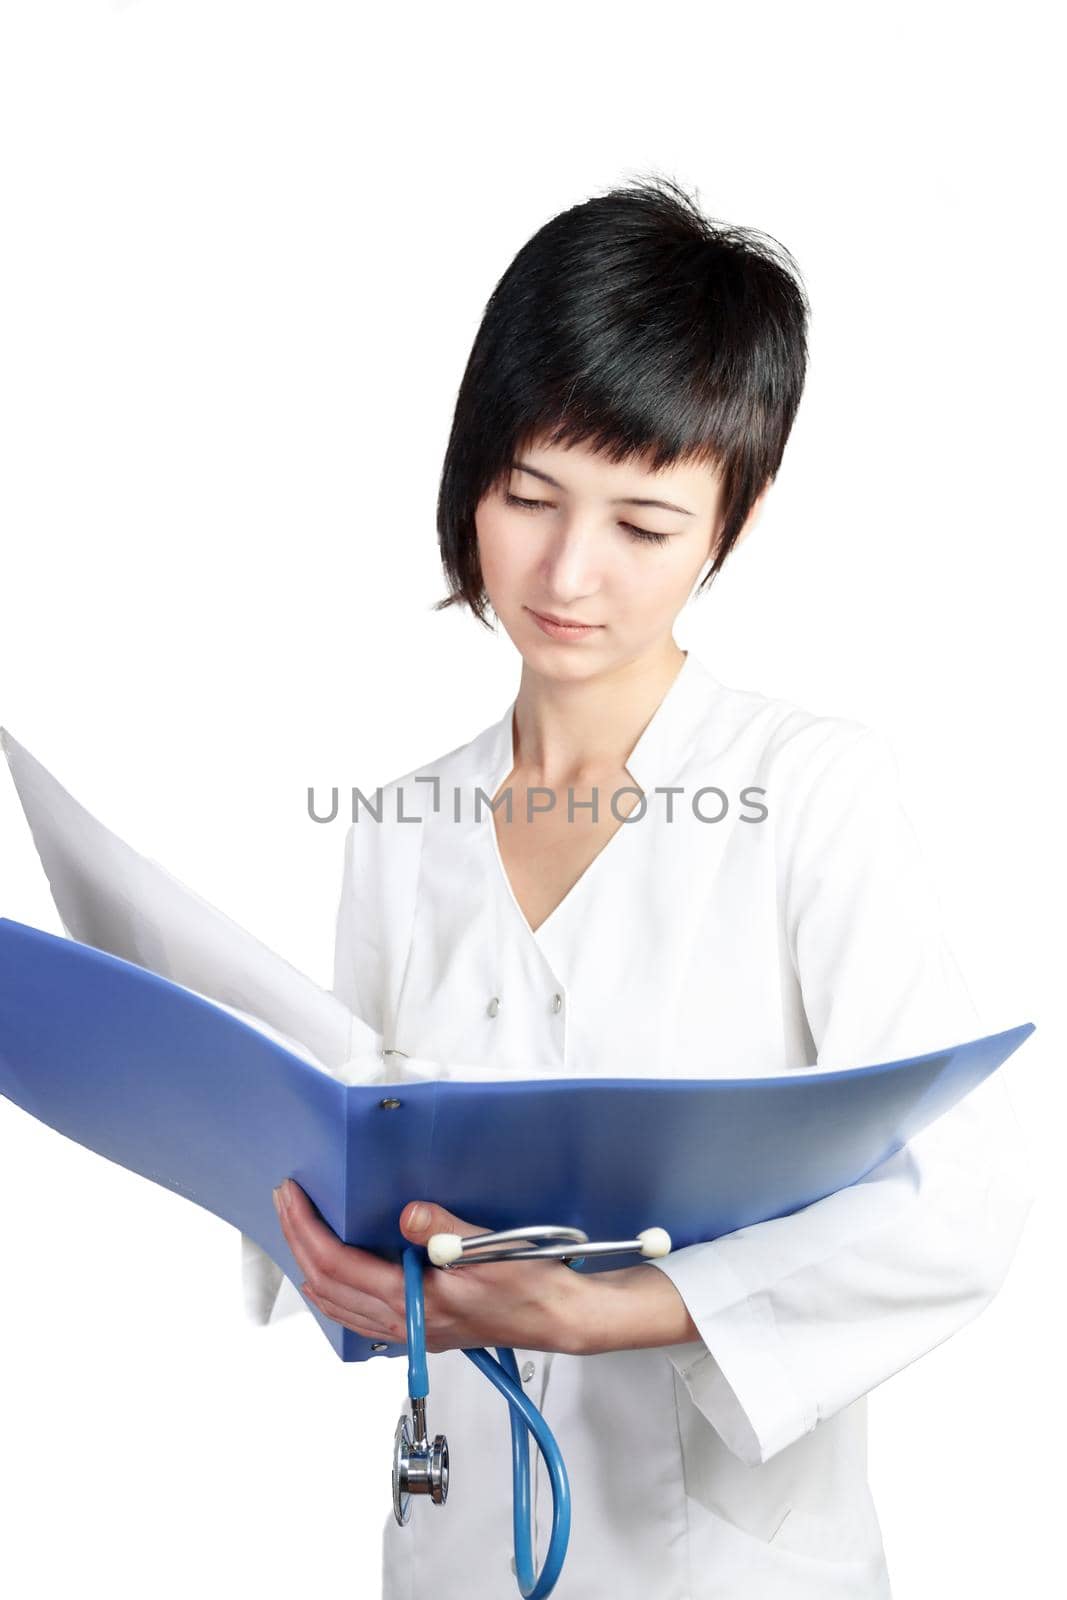 young woman doctor reads papers